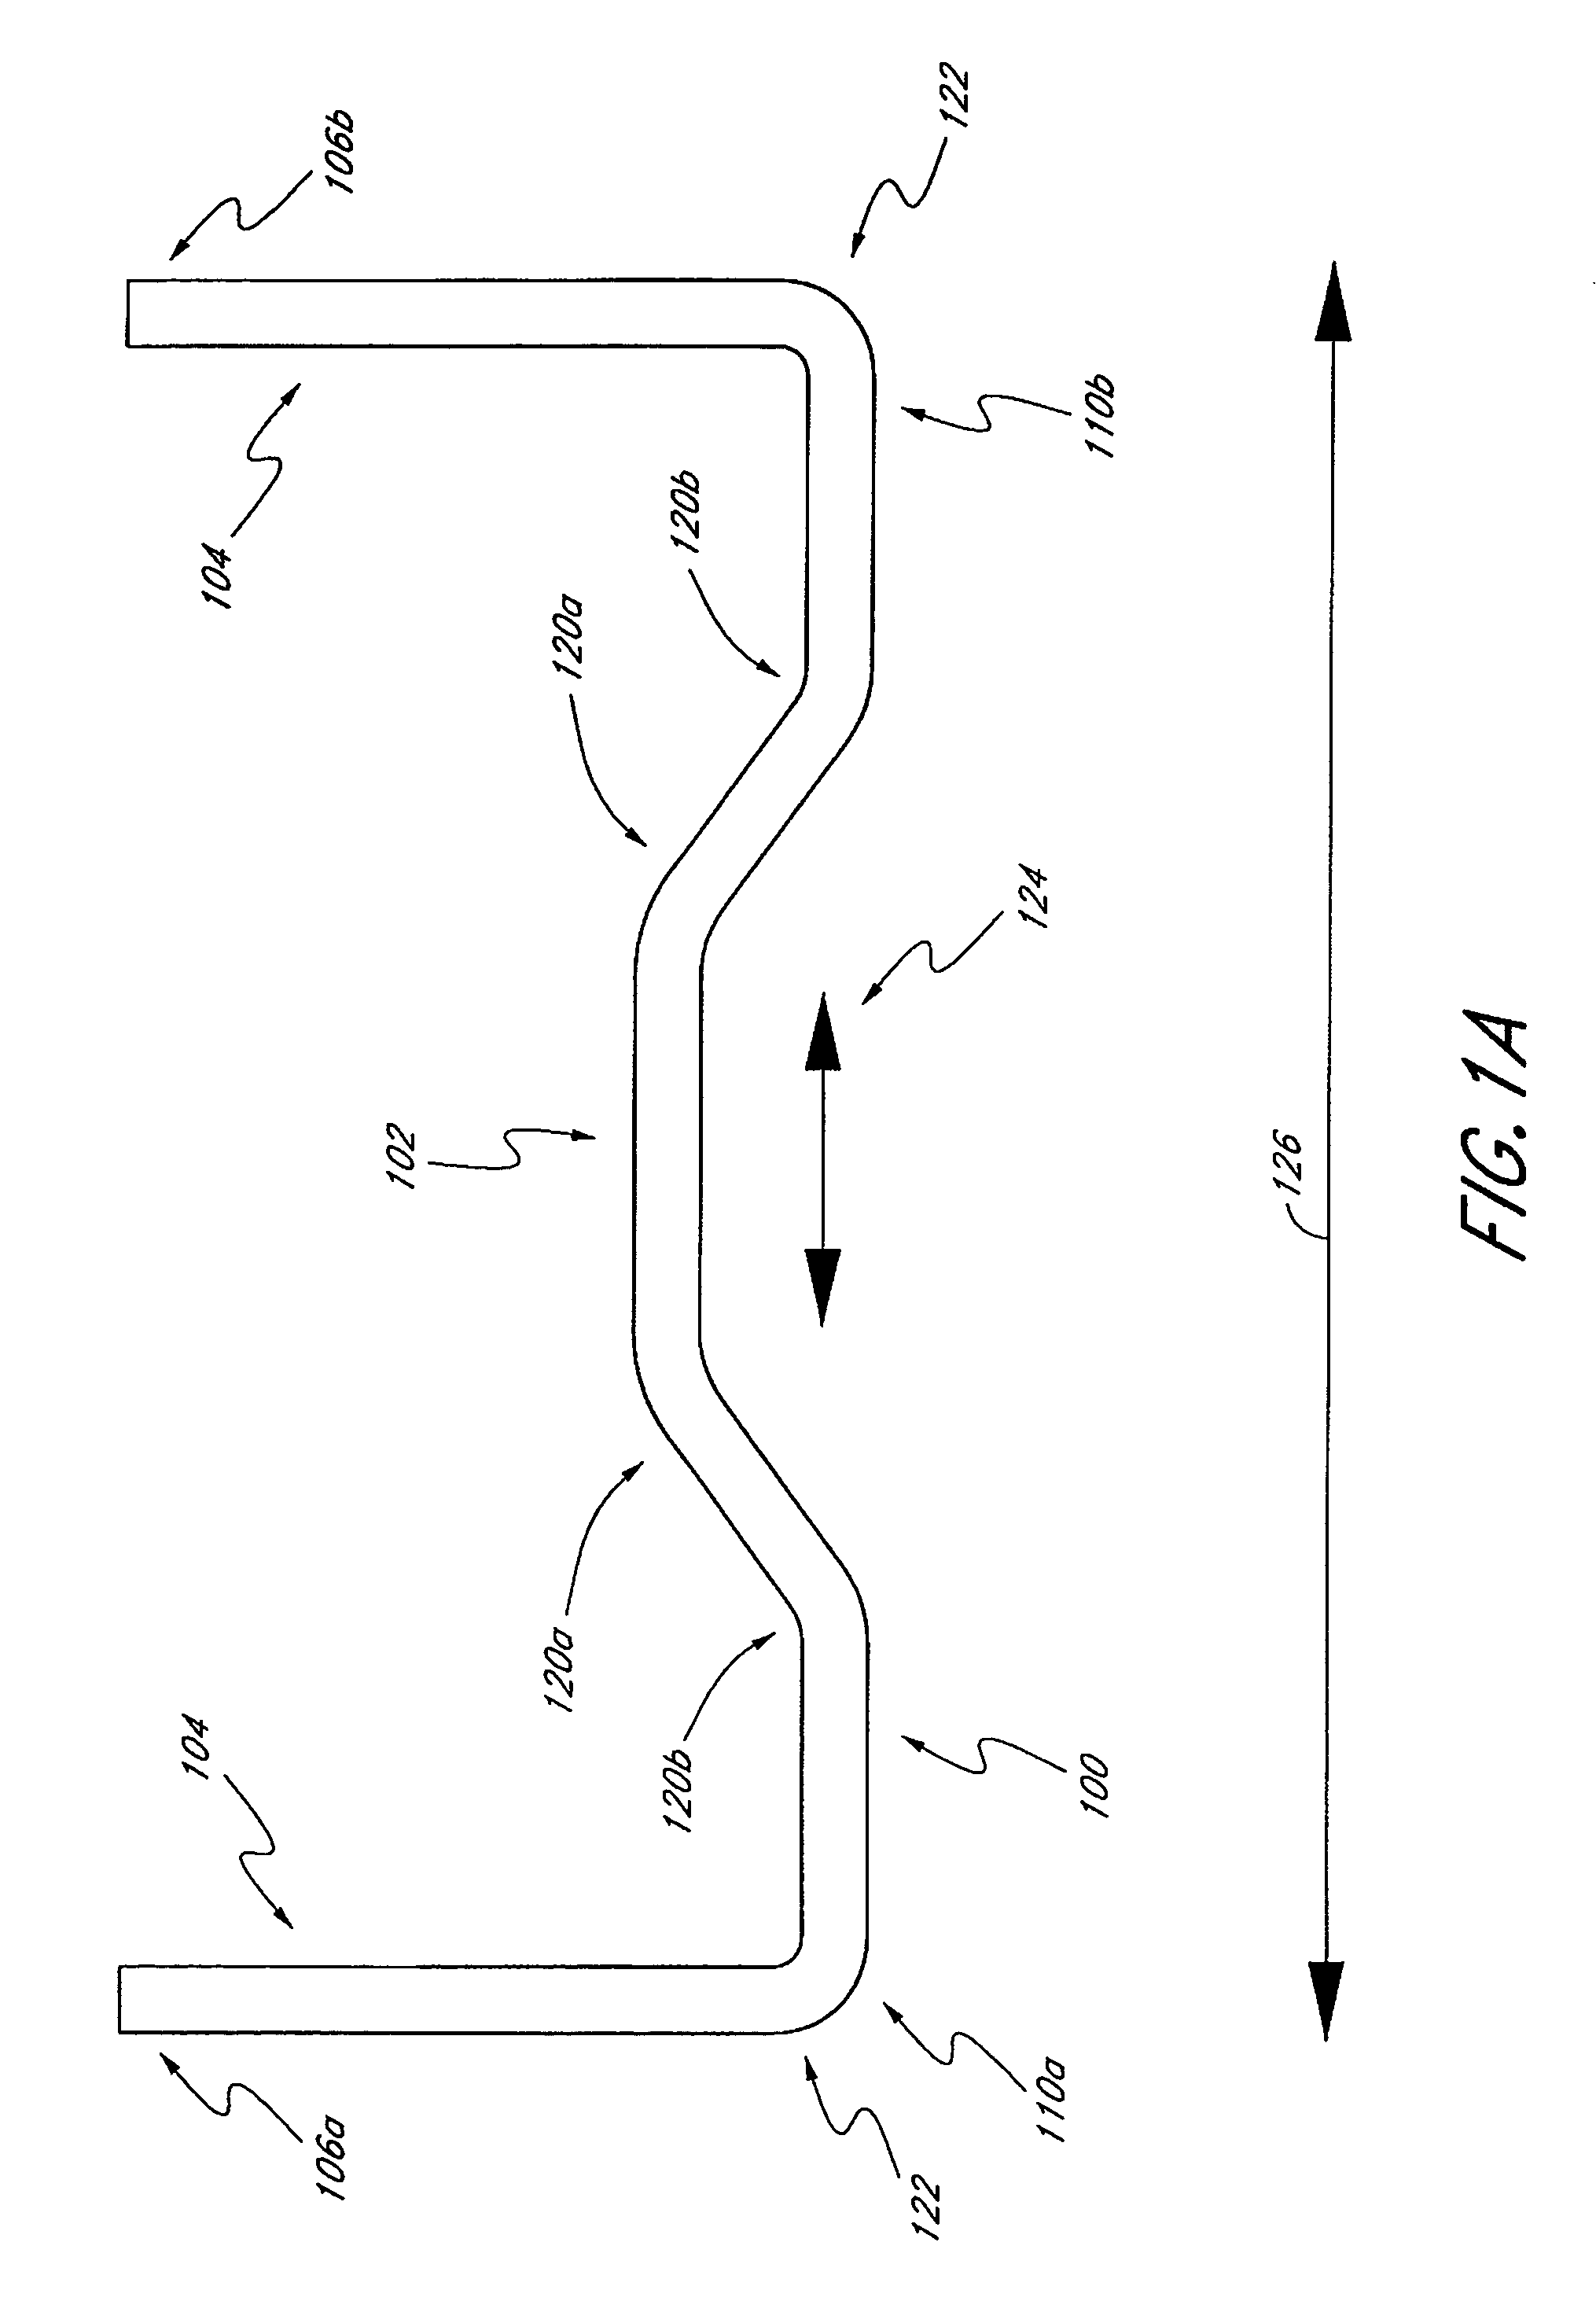 Methods of producing high-strength metal tubular bars possessing improved cold formability